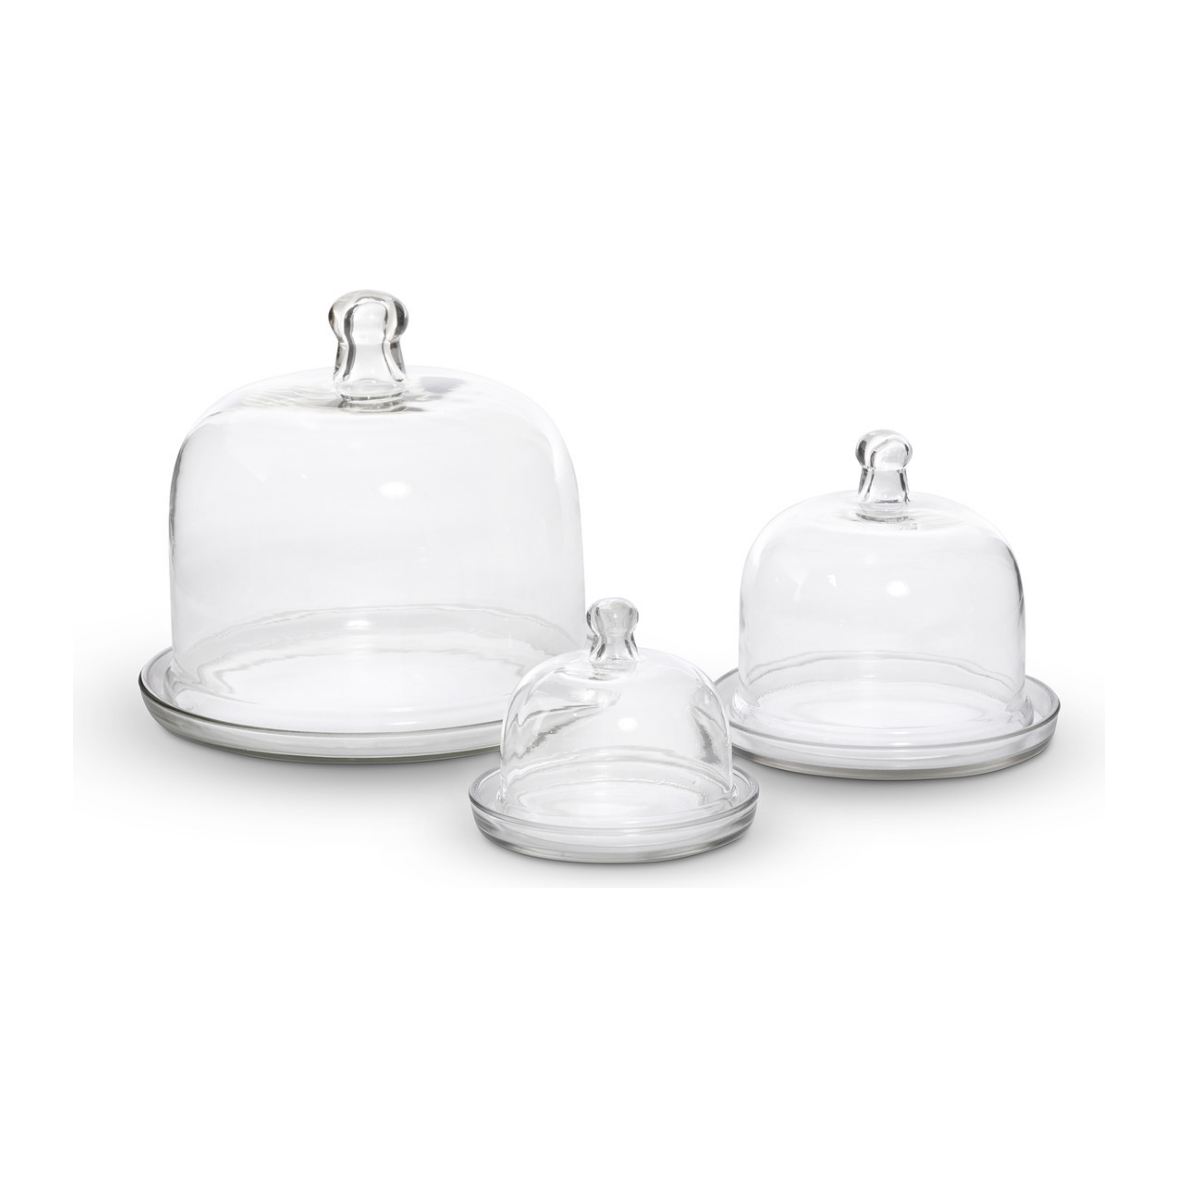 Cake & Pastry Dome (3 Size Options)